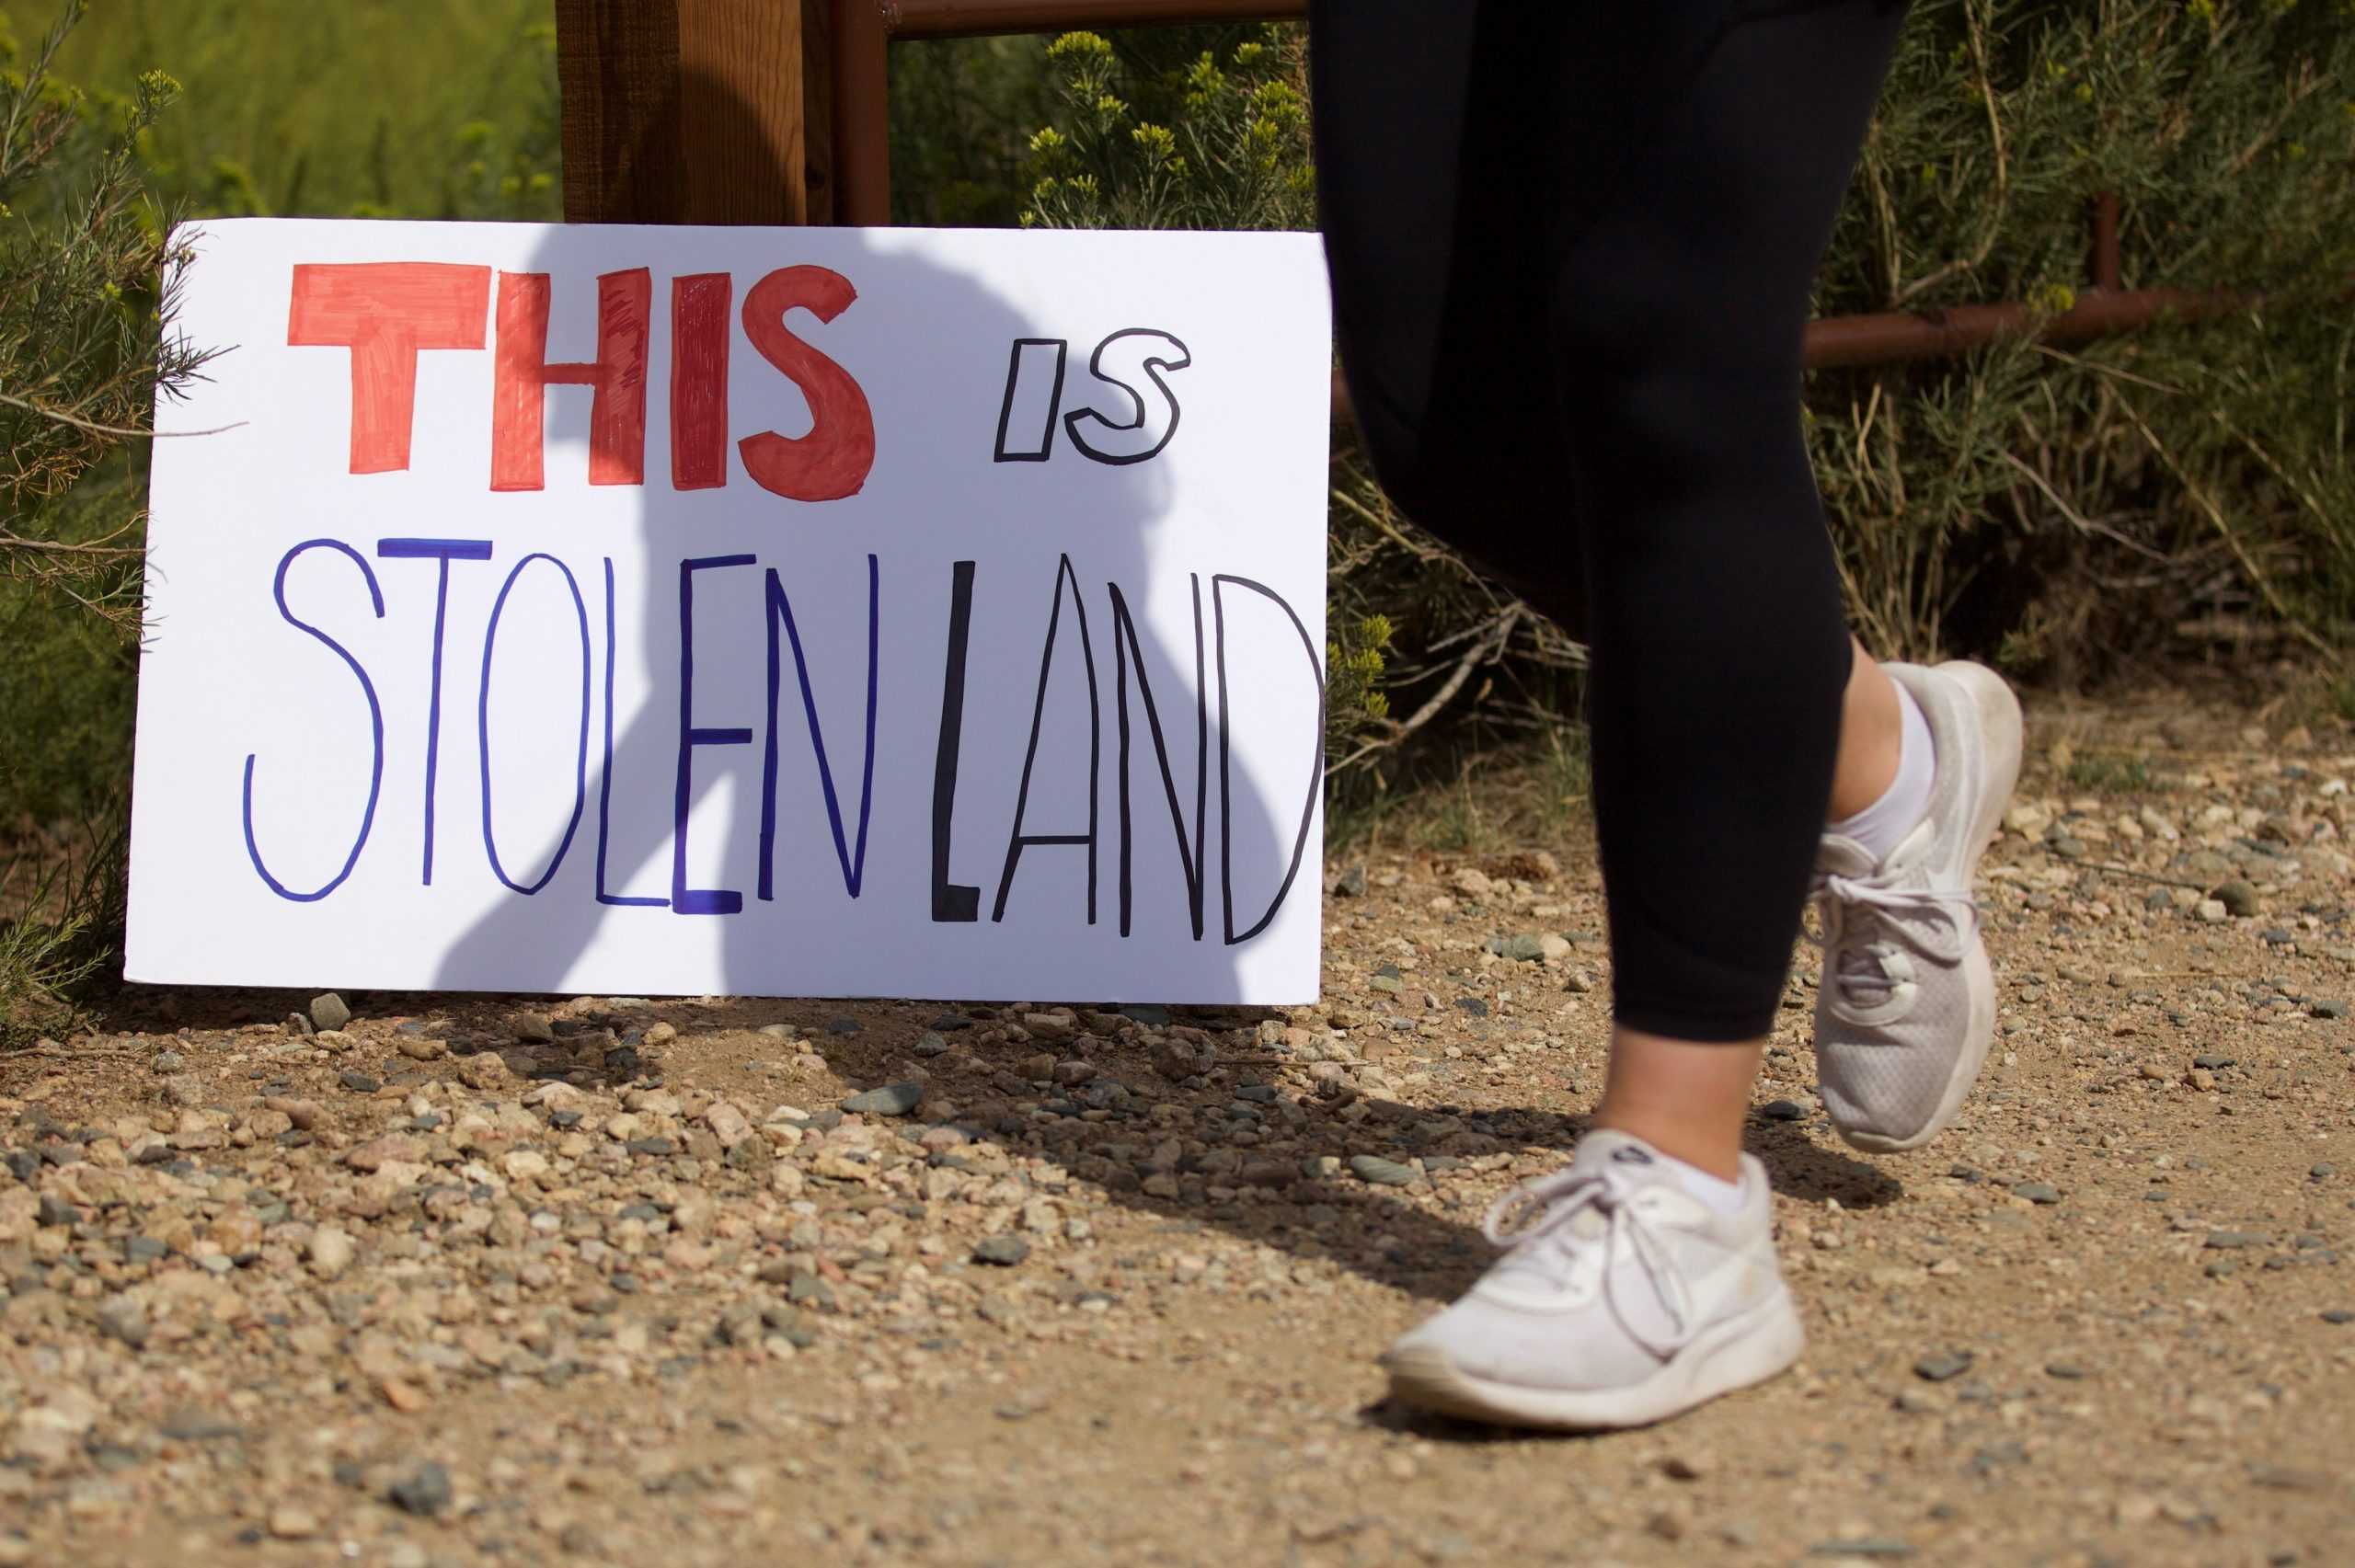 A person walks past a sign that reads "THIS IS STOLEN LAND"